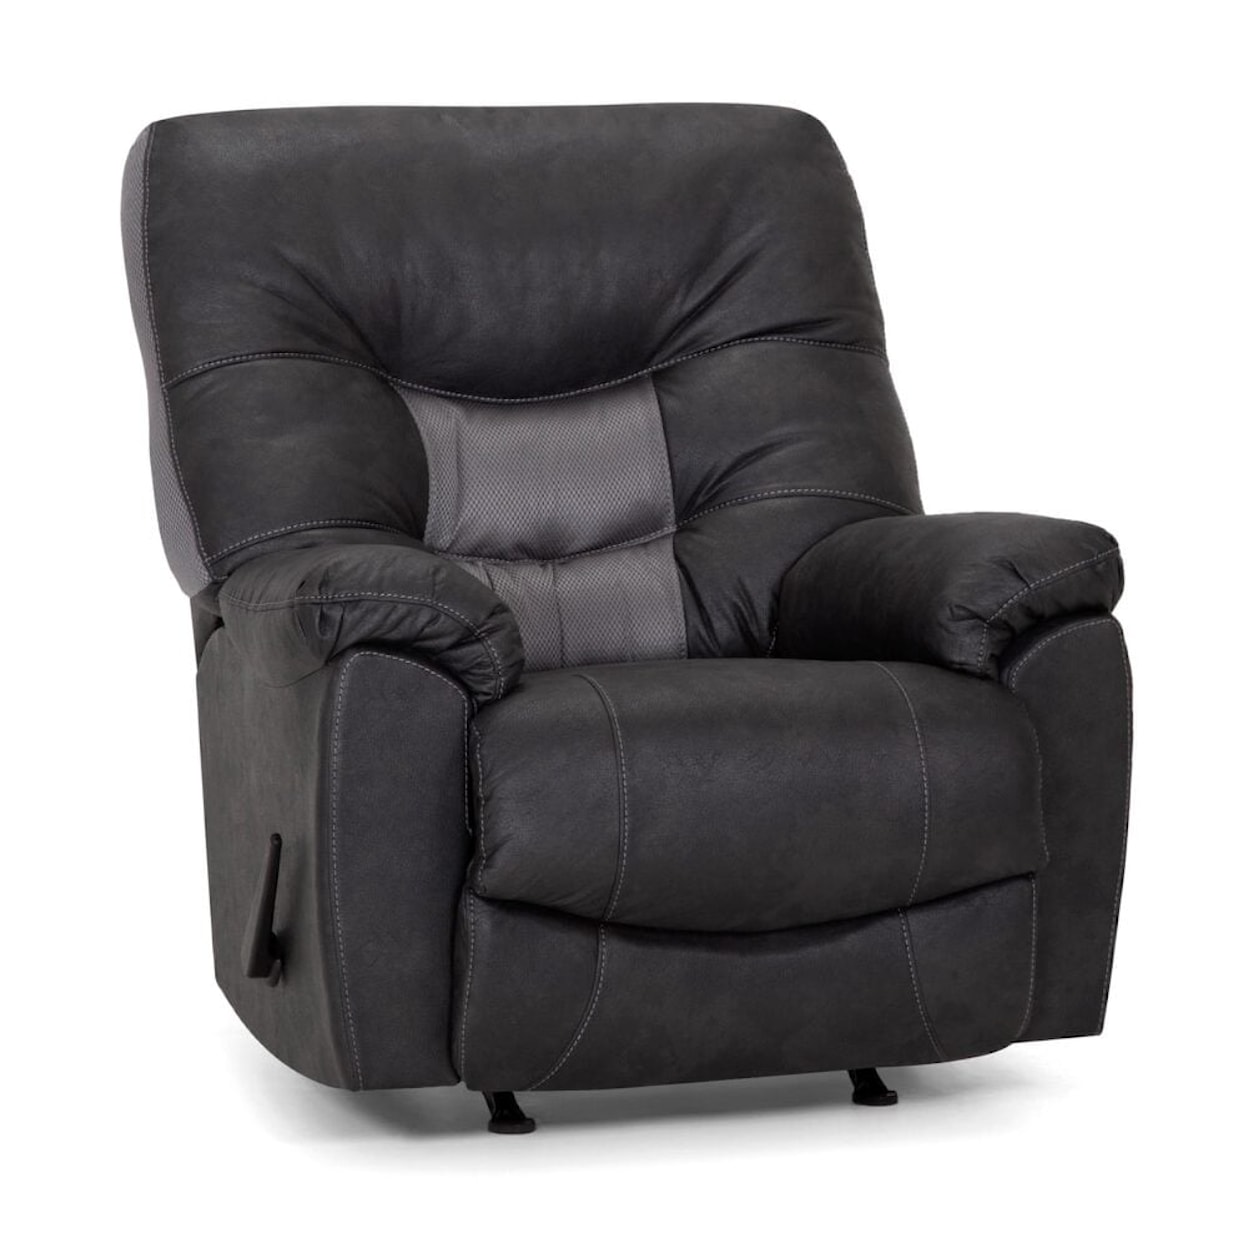 Franklin Recliners CHARCOAL TWO TONE ROCKING RECLINER |